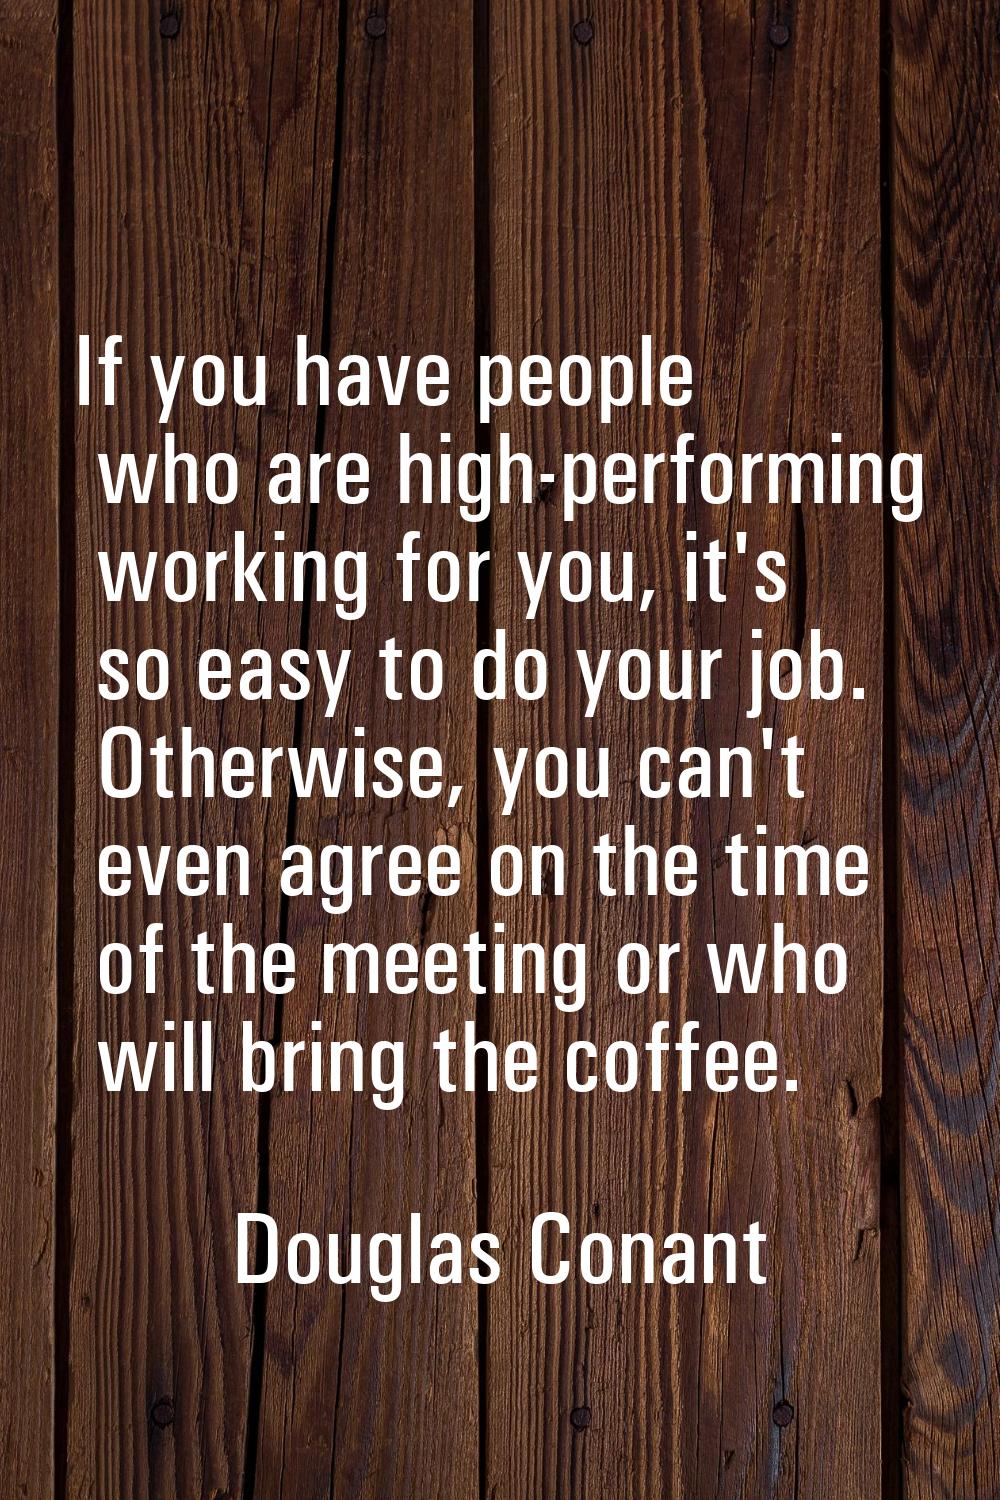 If you have people who are high-performing working for you, it's so easy to do your job. Otherwise,